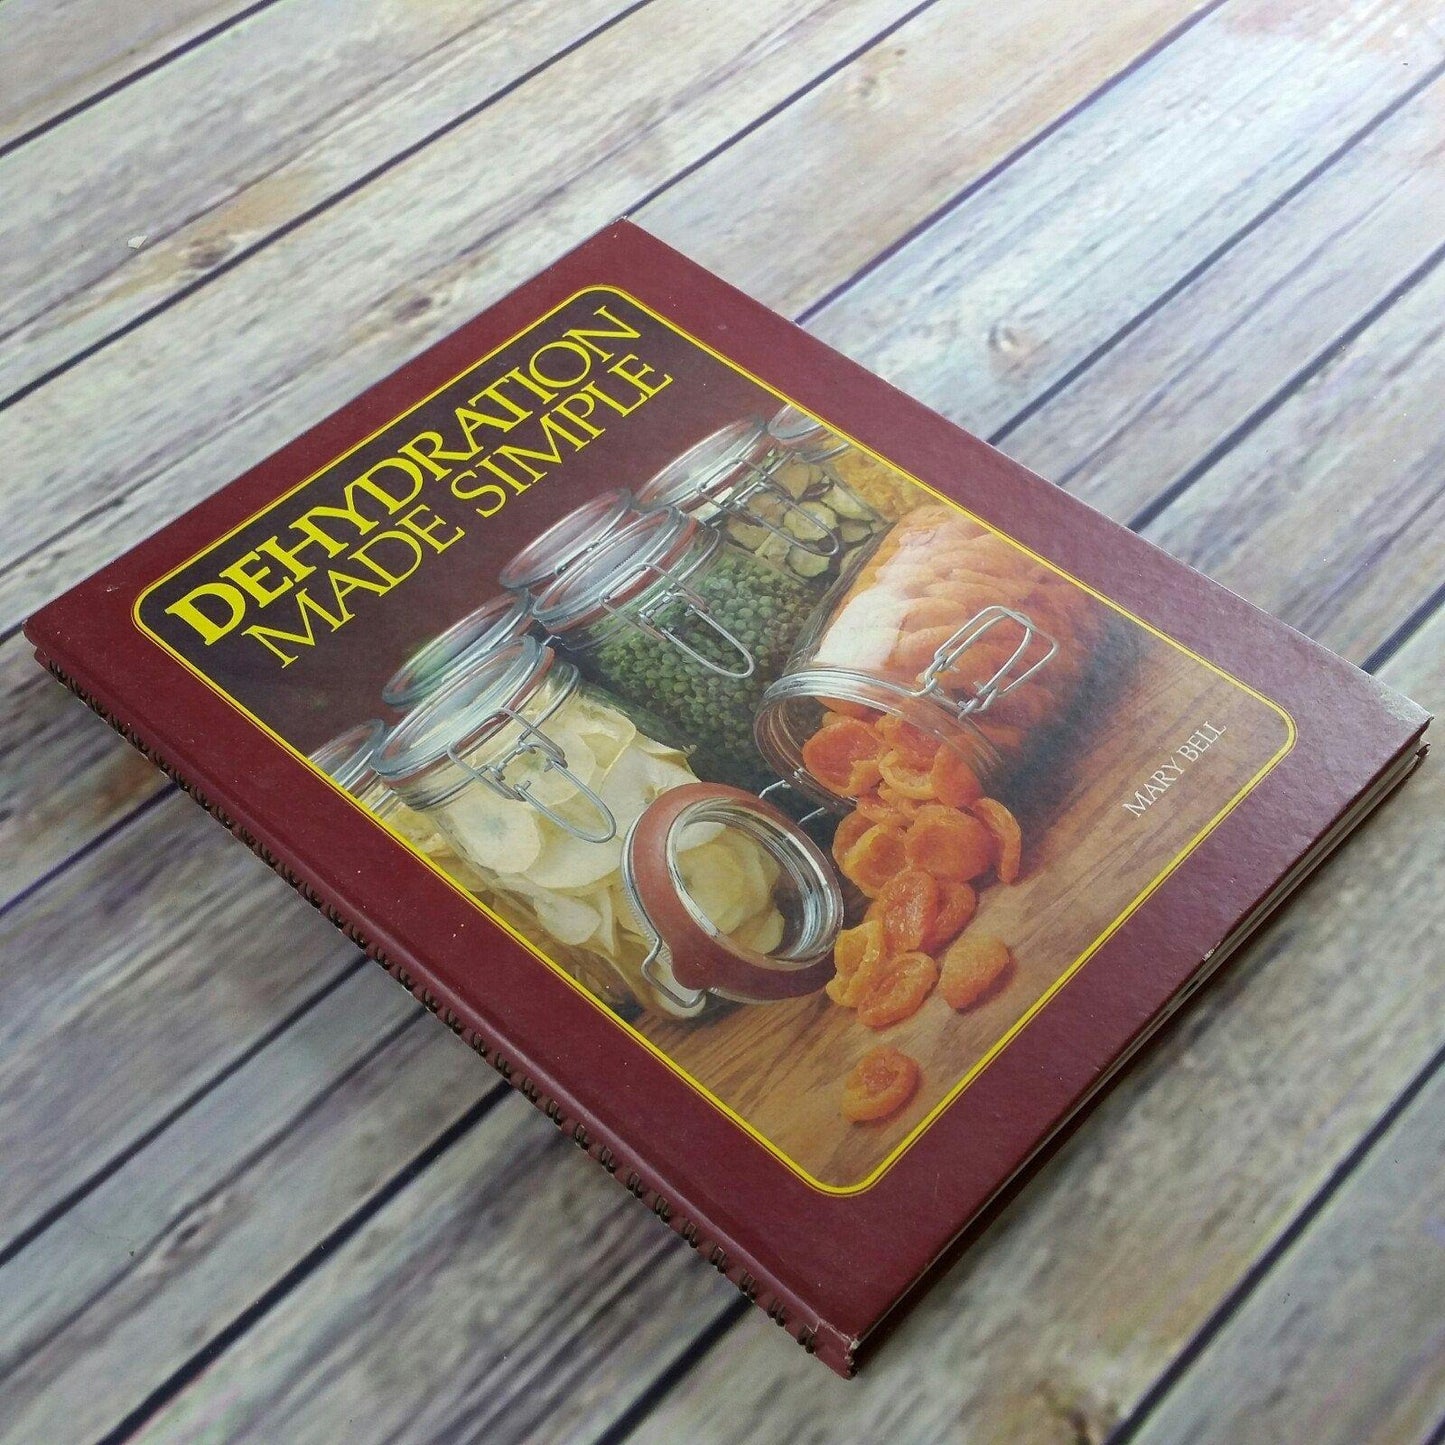 Vintage Cookbook Dehydration Made Simple Magic Aire Dehydrators Owner's Manual Recipes Instruction 1981 Magic Mill Hardcover Mary Bell